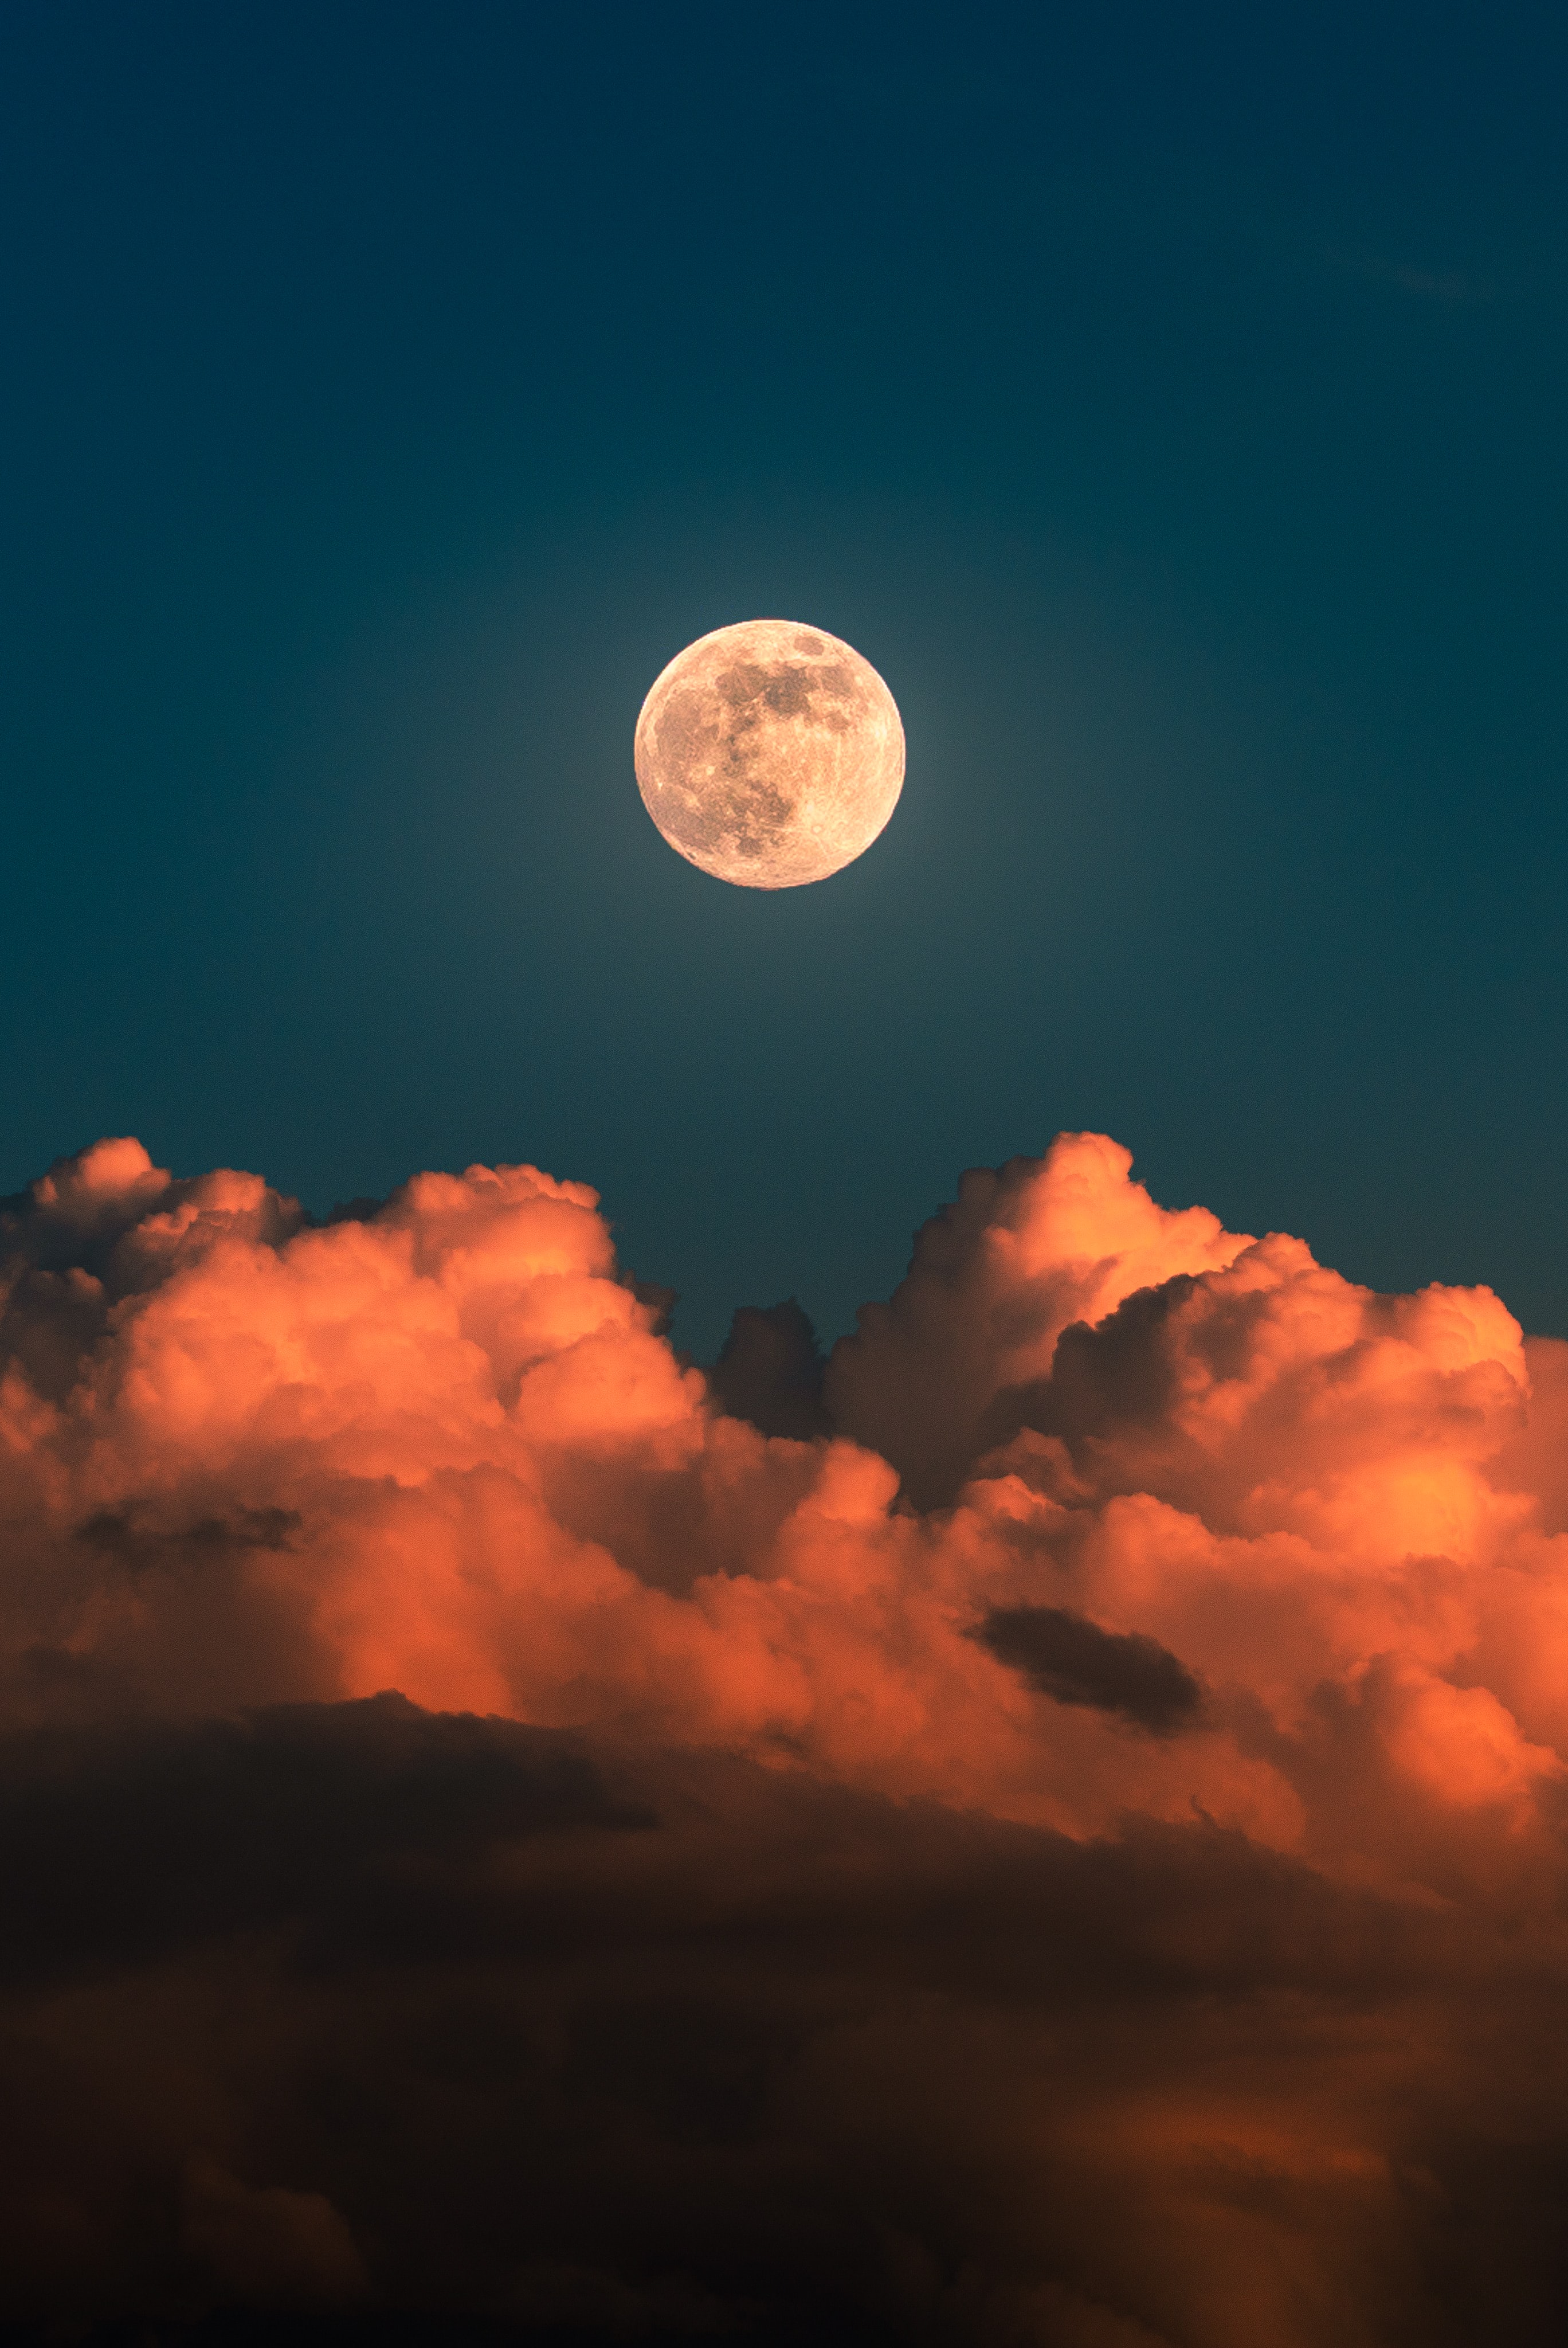 moon, clouds, full moon, nature, sky